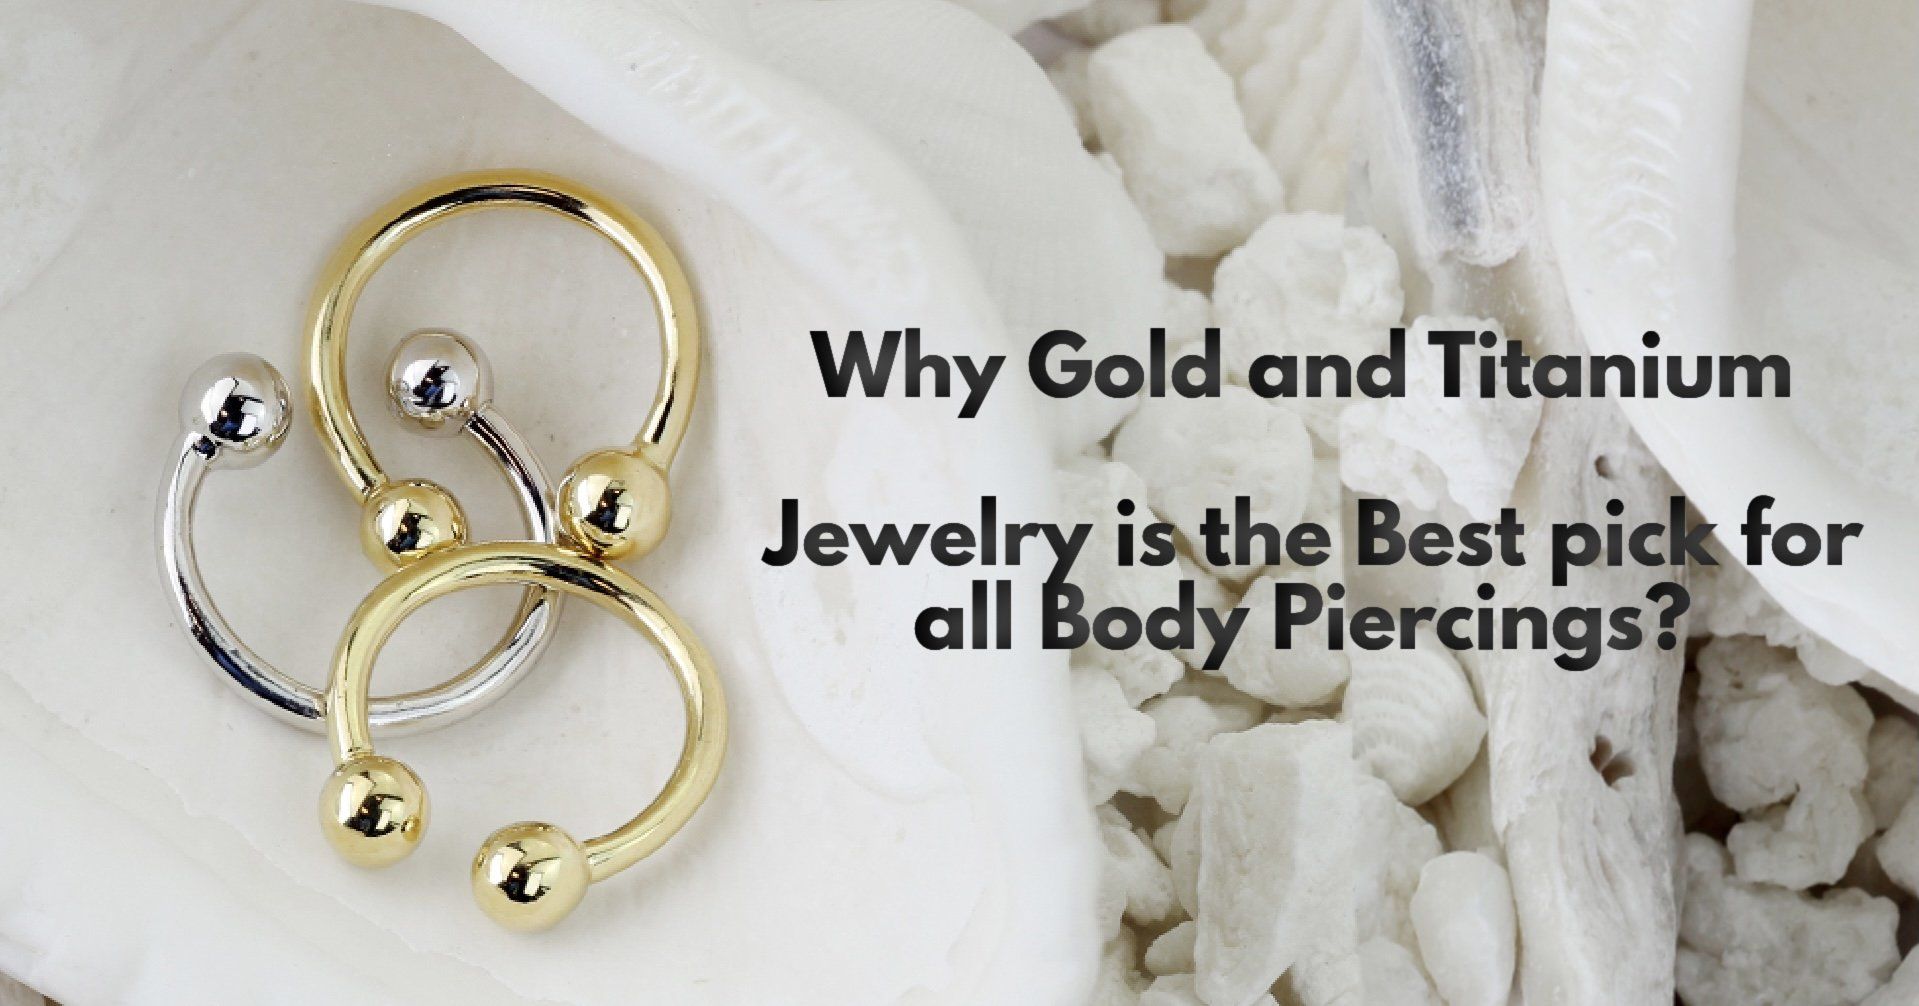 Why Gold and Titanium is the preferred Jewelry to buy?